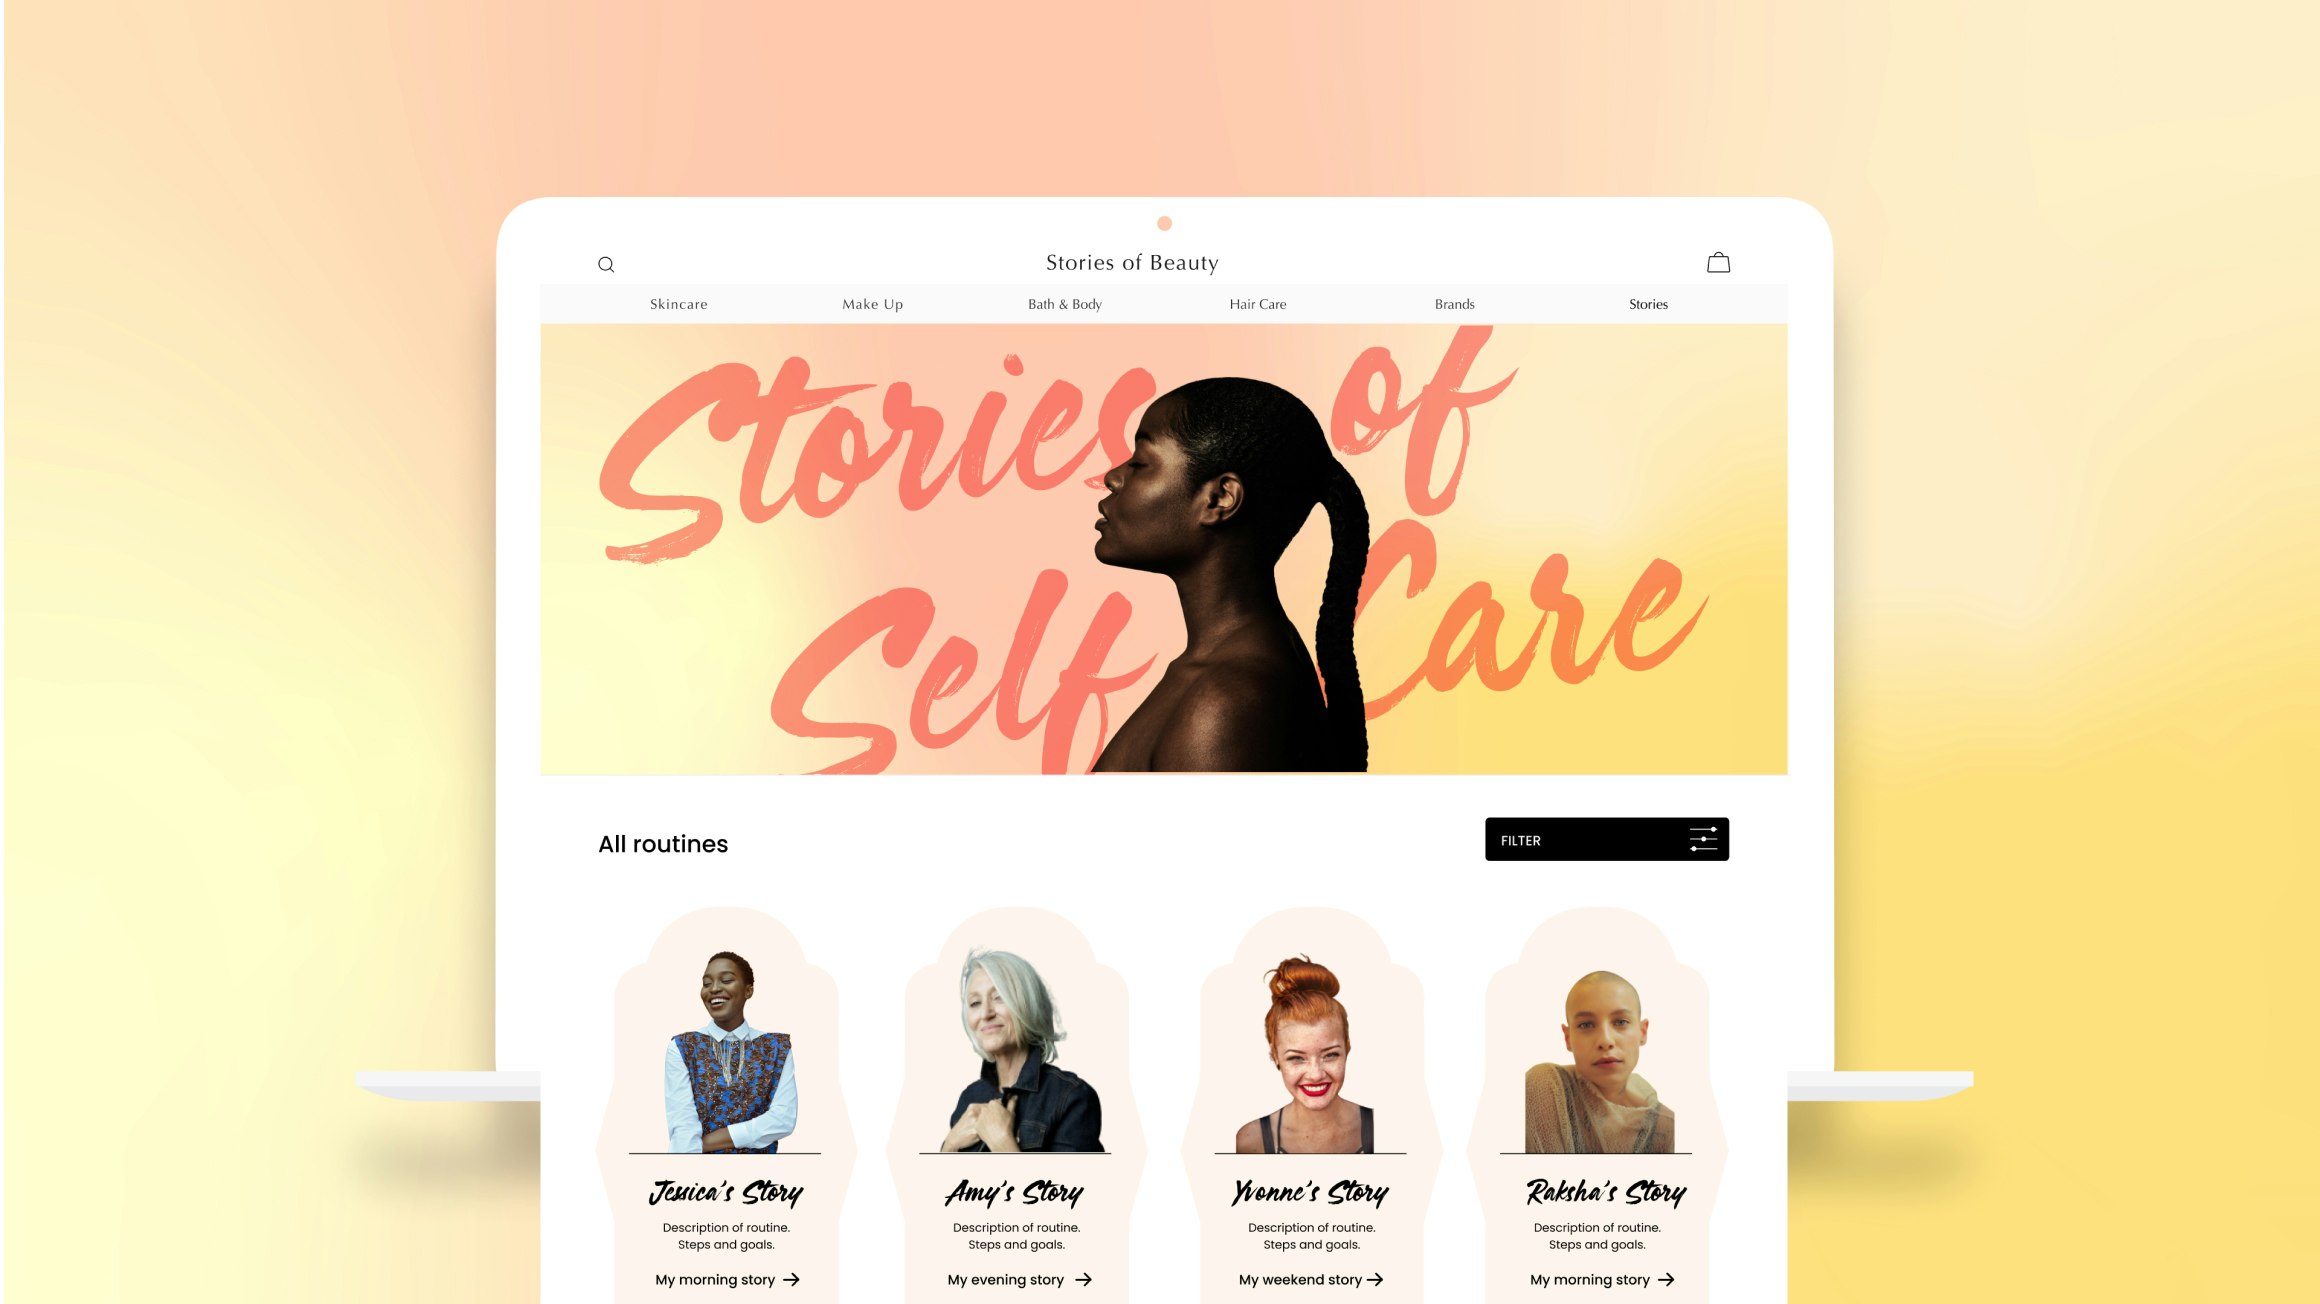 A new e-commerce beauty and wellbeing experience